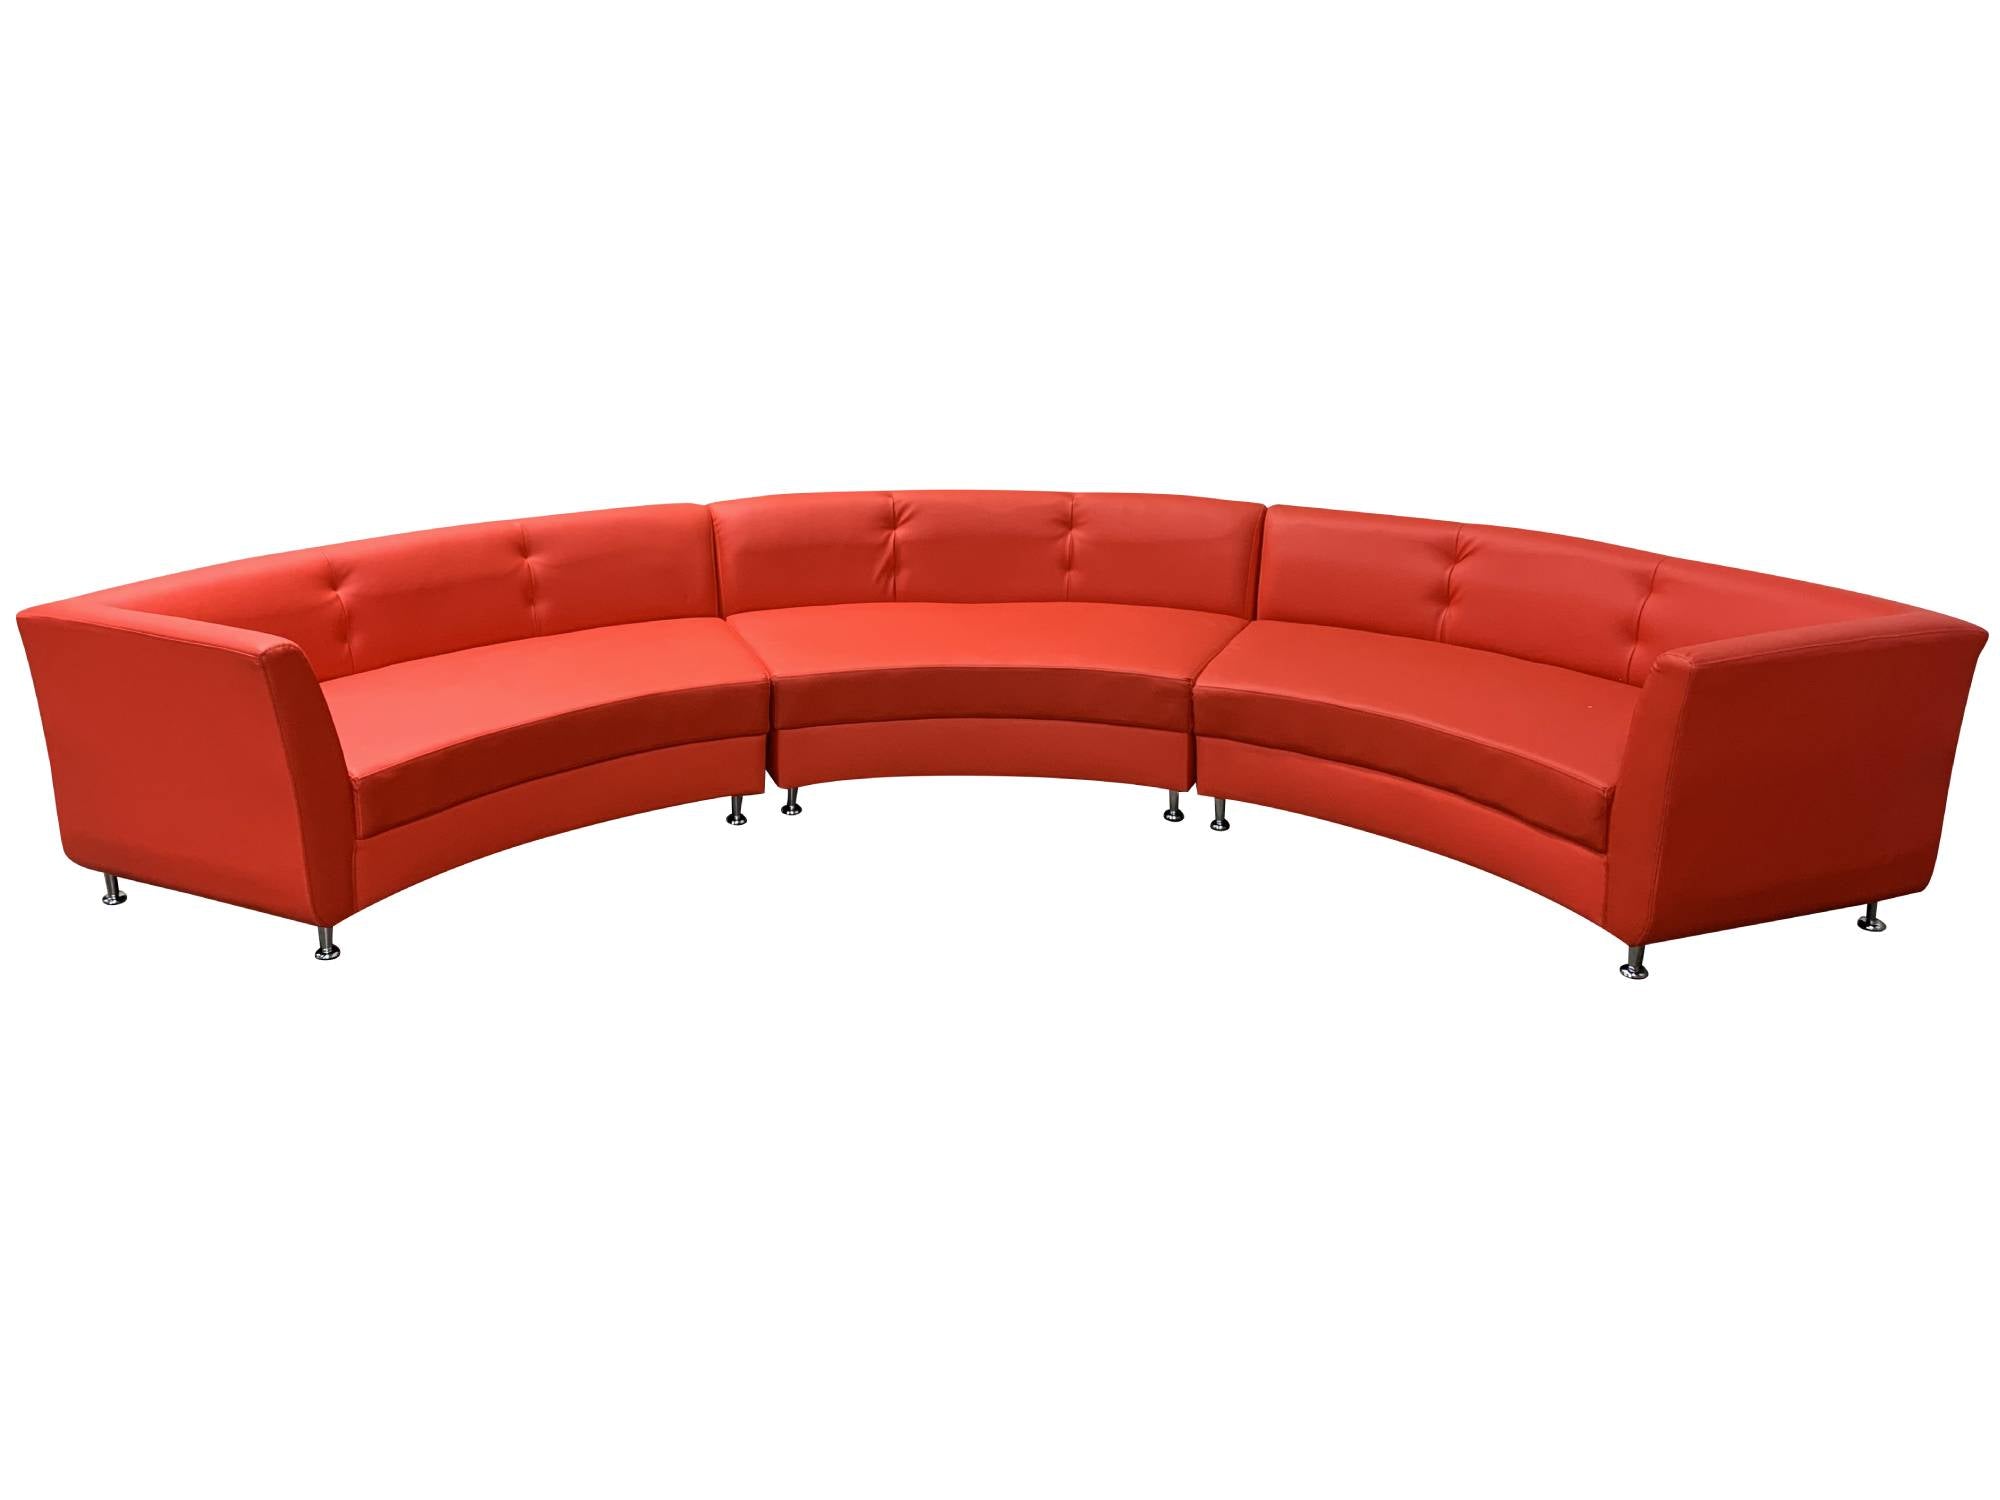 LUXURY 3PC CURVED SOFA - RED